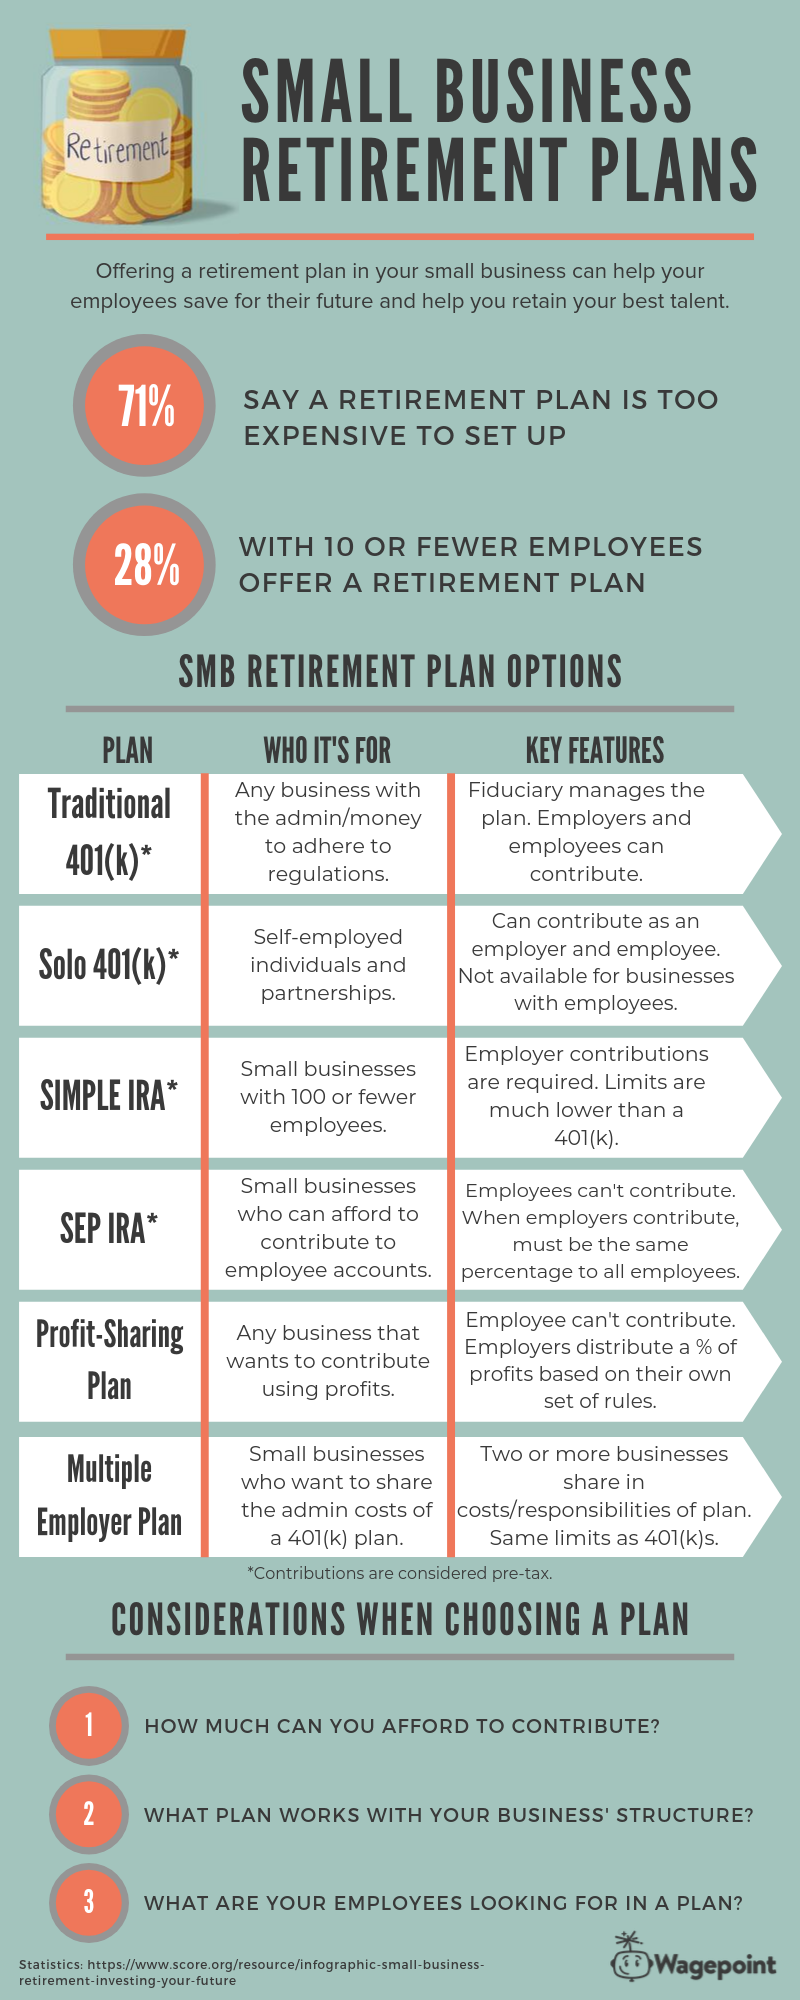 small business retirement plans